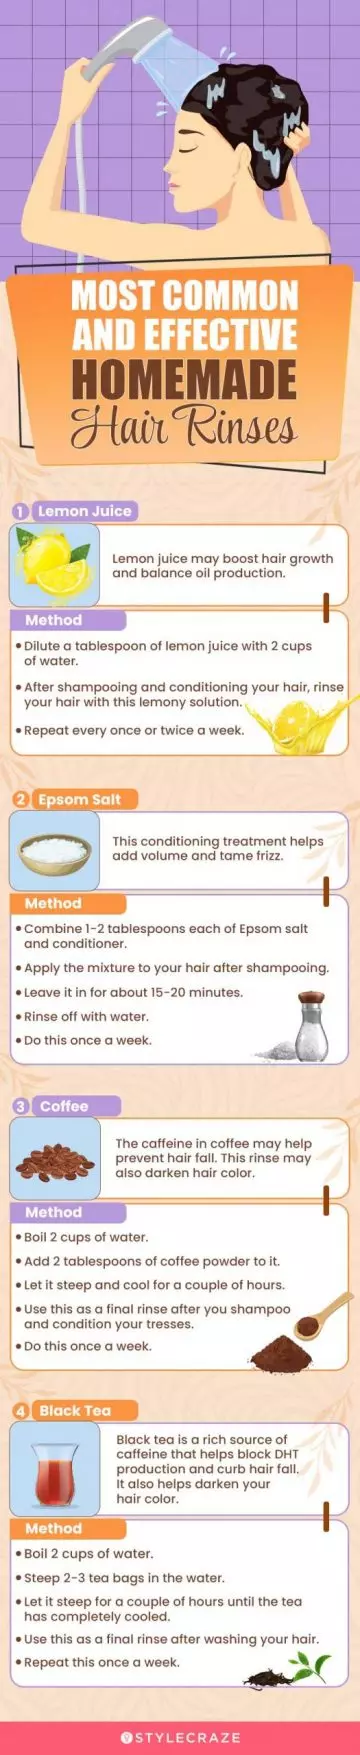 most common and effective homemade hair rinses (infographic)